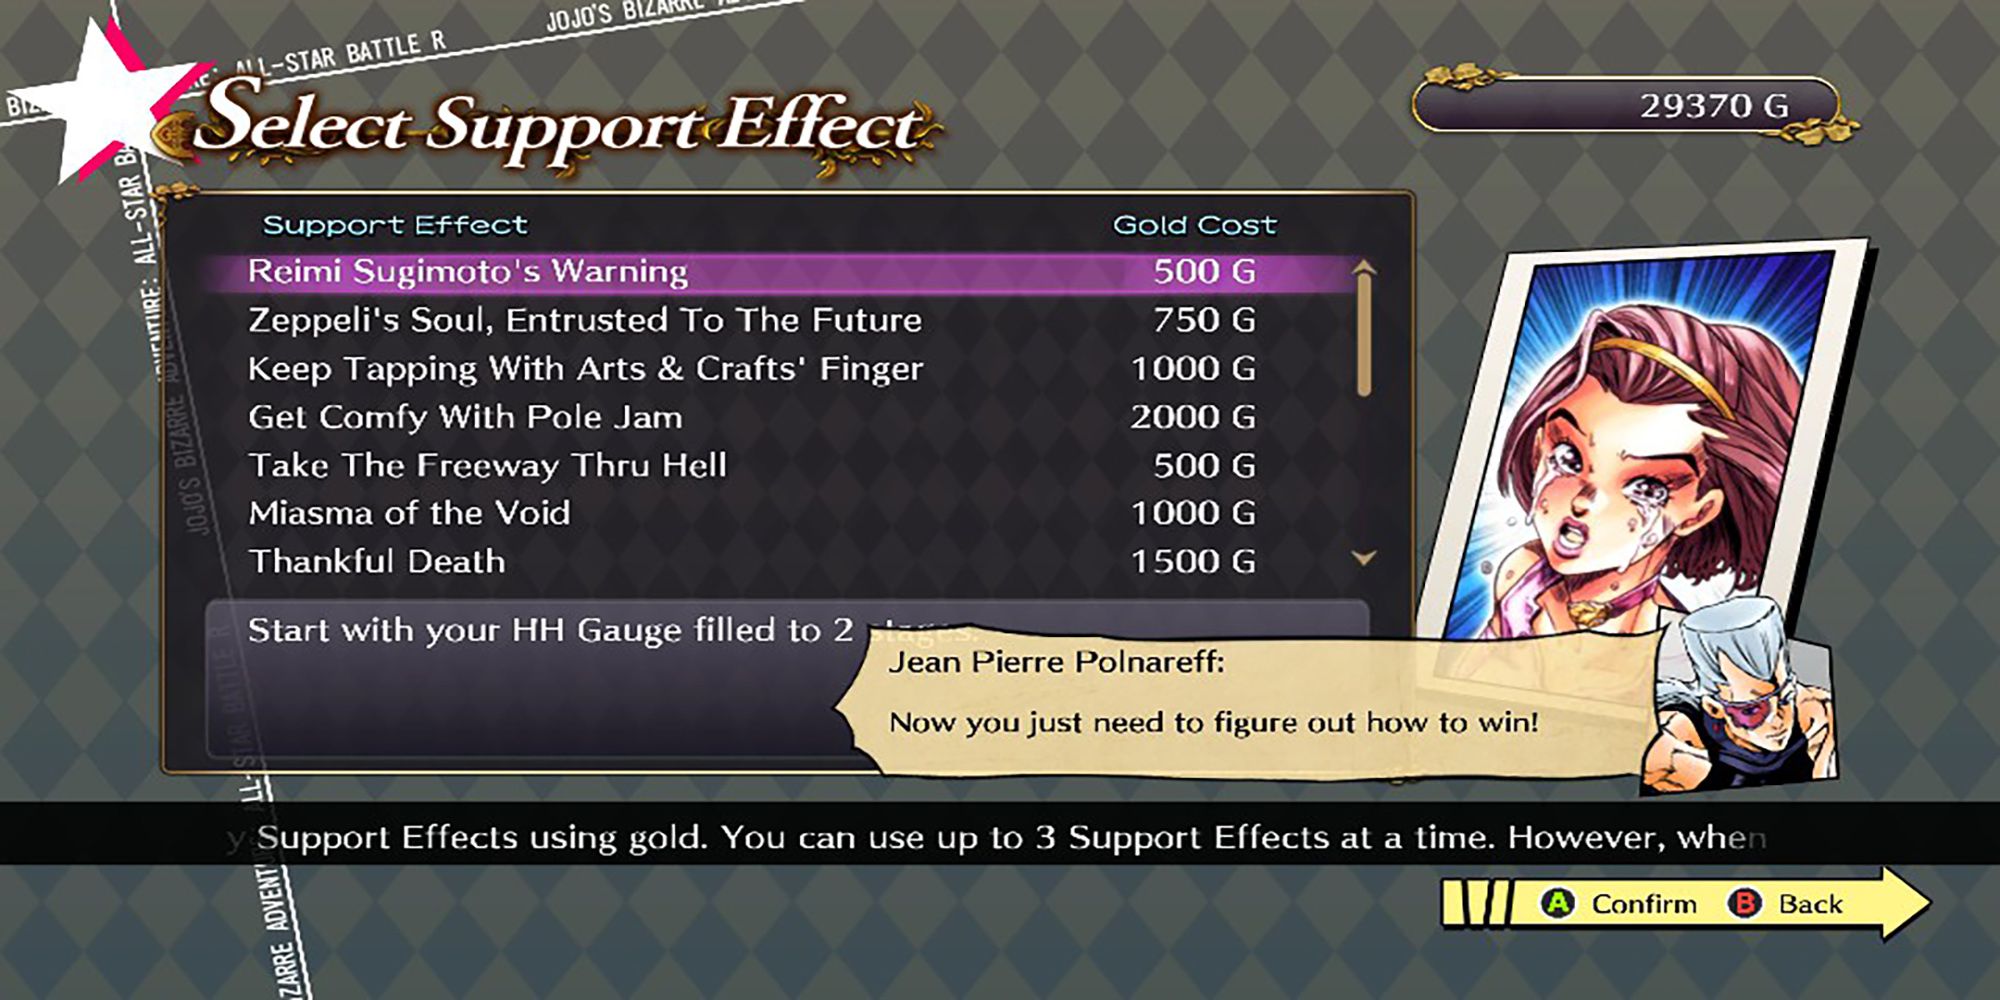 The Support Effect menu is where players can buy performance enhancing bonuses in Jojo's Bizarre Adventure: ASBR.